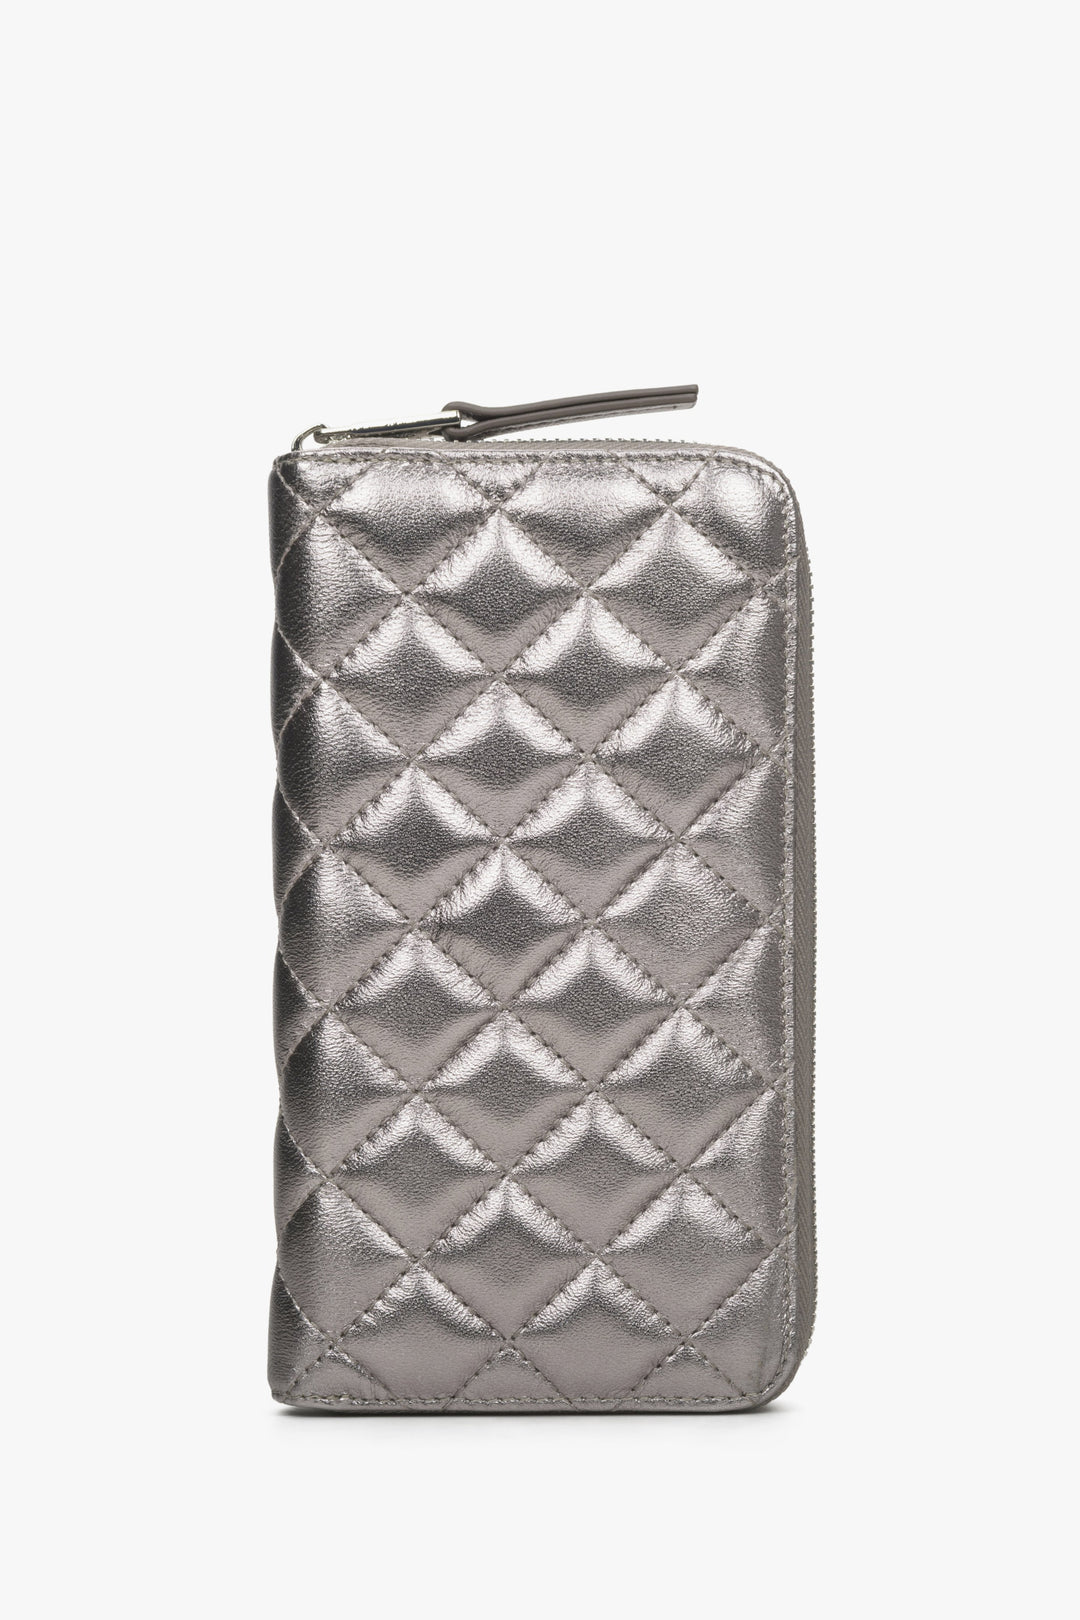 Spacious silver leather women's wallet.